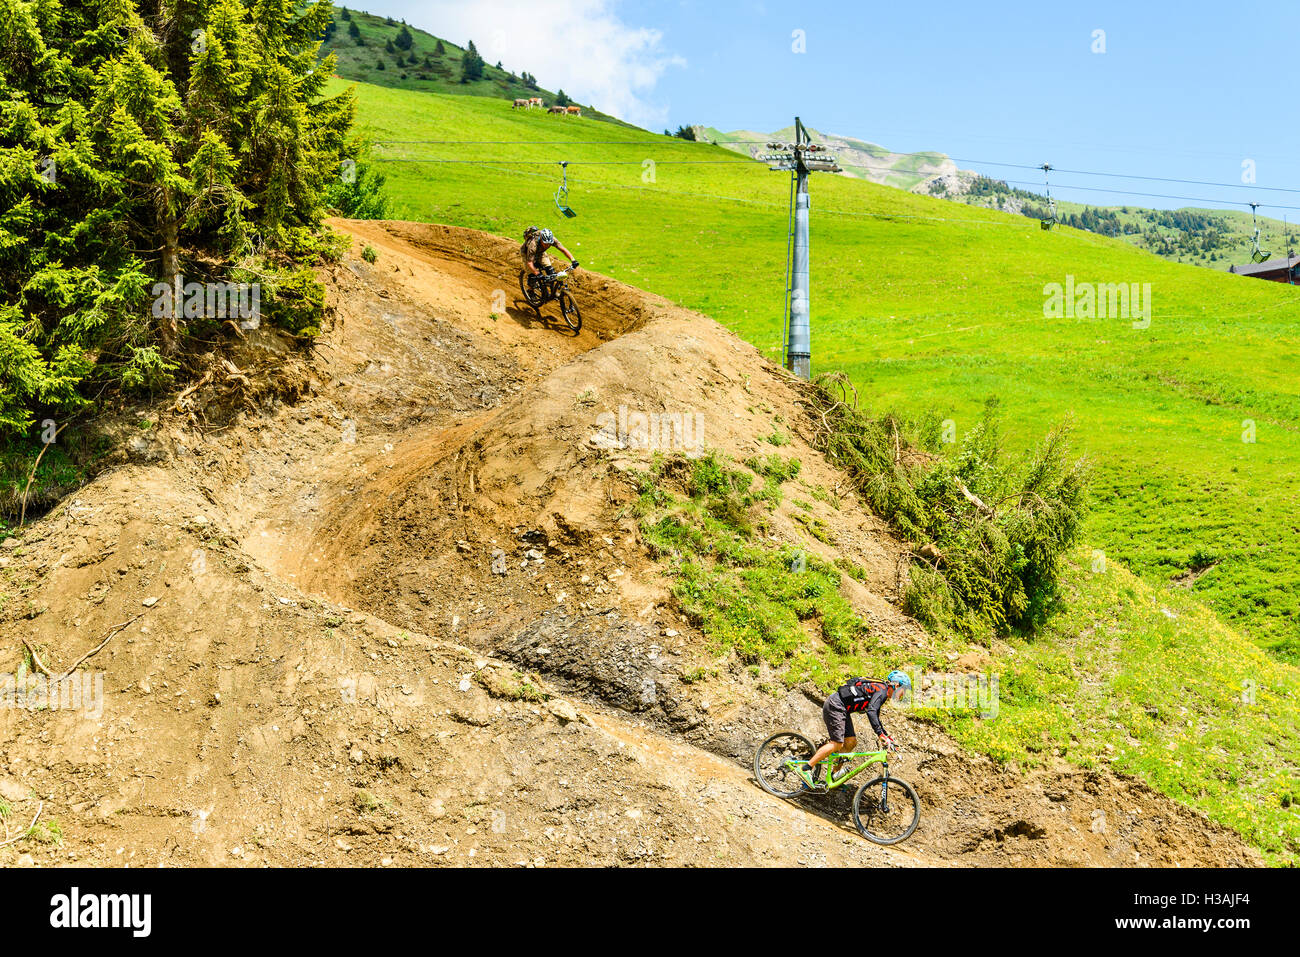 Rider participating in Pass'Portes du Soleil MTB 2016 a mountain bike event across the French-Swiss border Stock Photo